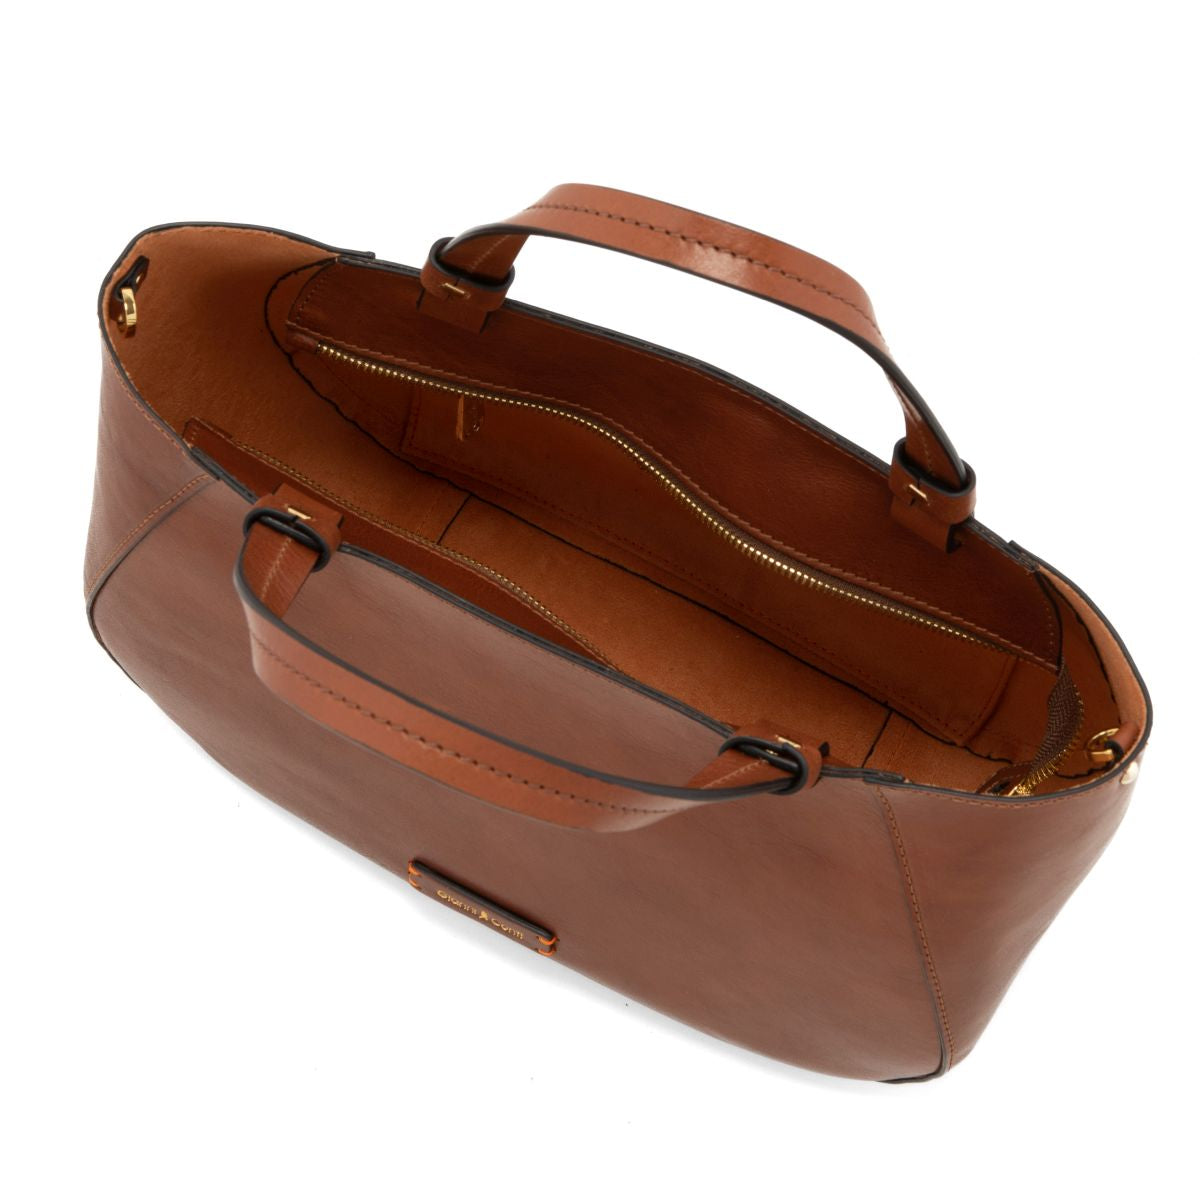 LINA by Gianni Conti - Italian Vegetable-Tanned Leather Top Handle Bag